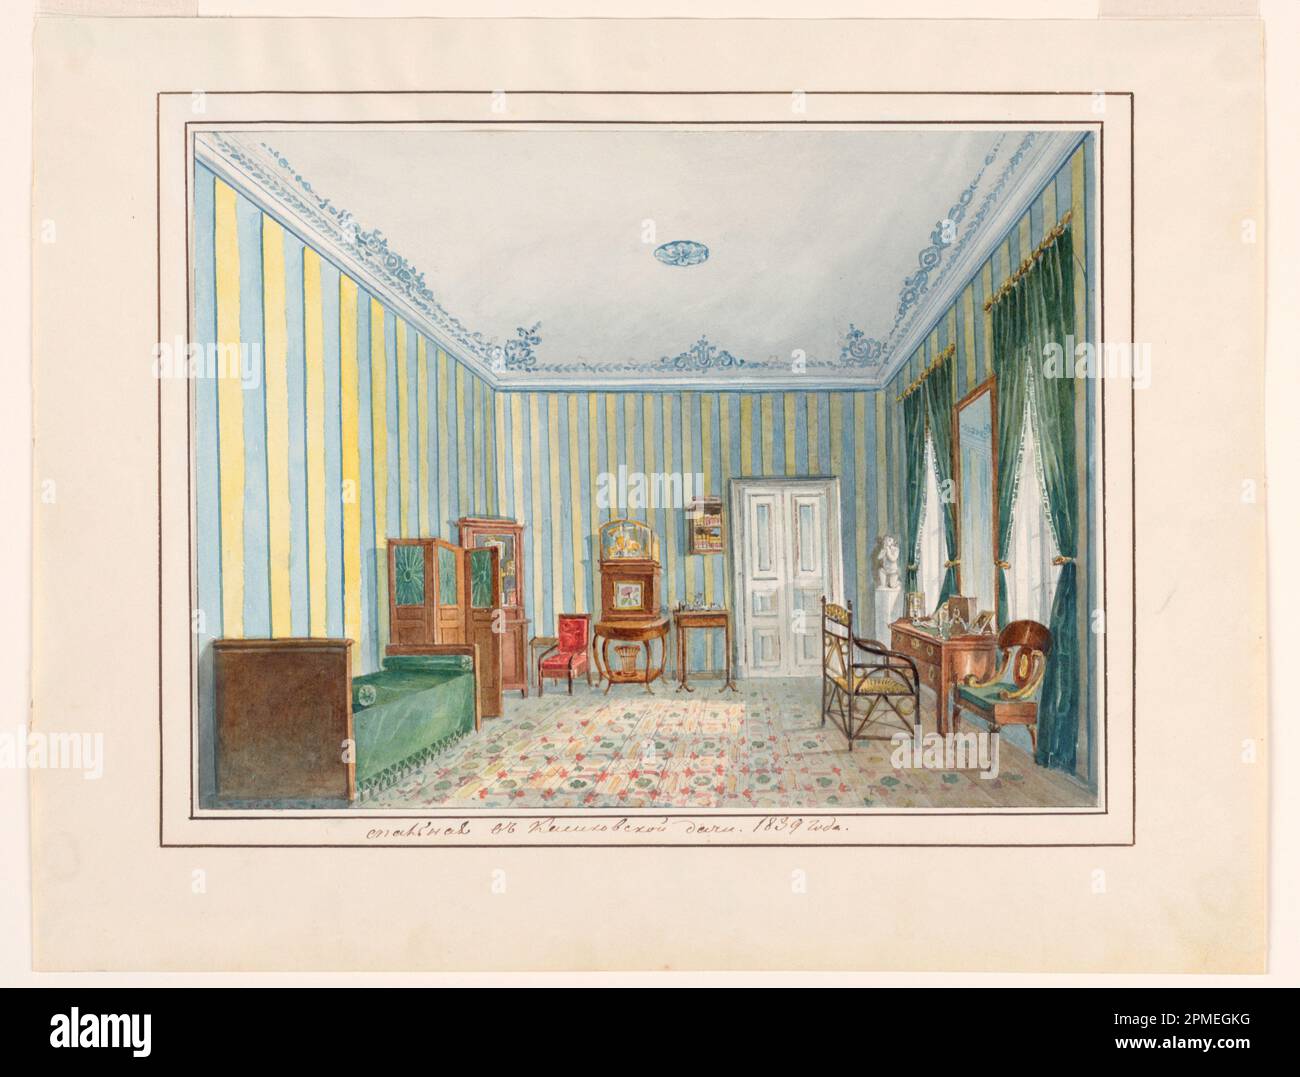 Drawing, Bedroom in a Country Dacha; Unknown; brush and watercolor, pen and blue ink, graphite on white wove paper; Frame H x W x D: 39.7 x 50.2 x 2.5 cm (15 5/8 x 19 3/4 x 1 in.) Sheet: 18.3 x 24.3 cm (7 3/16 x 9 9/16 in.); Thaw Collection; 2007-27-25 Stock Photo